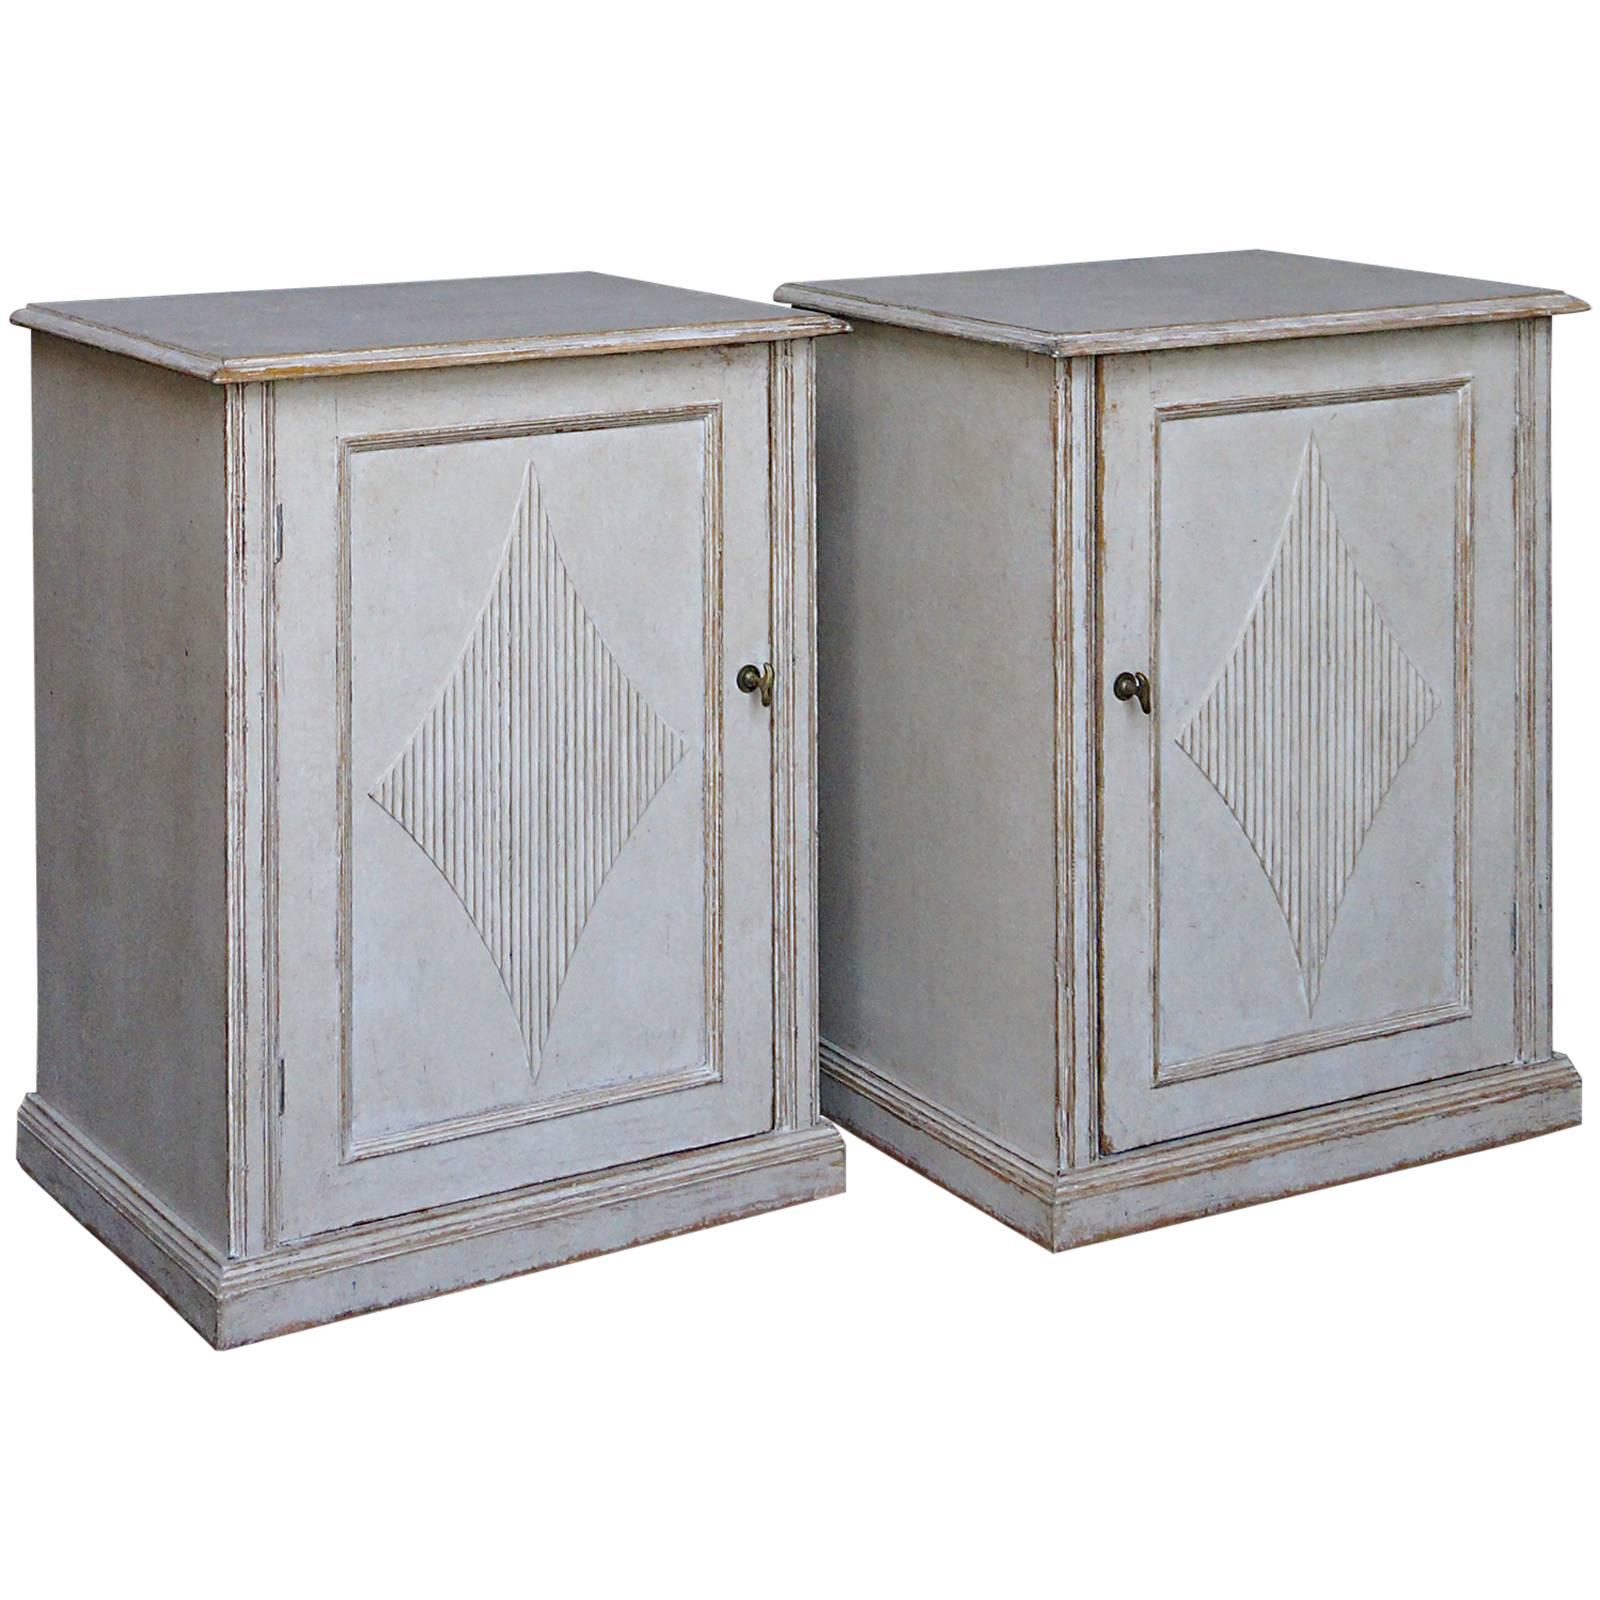 Pair of Swedish Gustavian Style Low Cabinets in White Paint